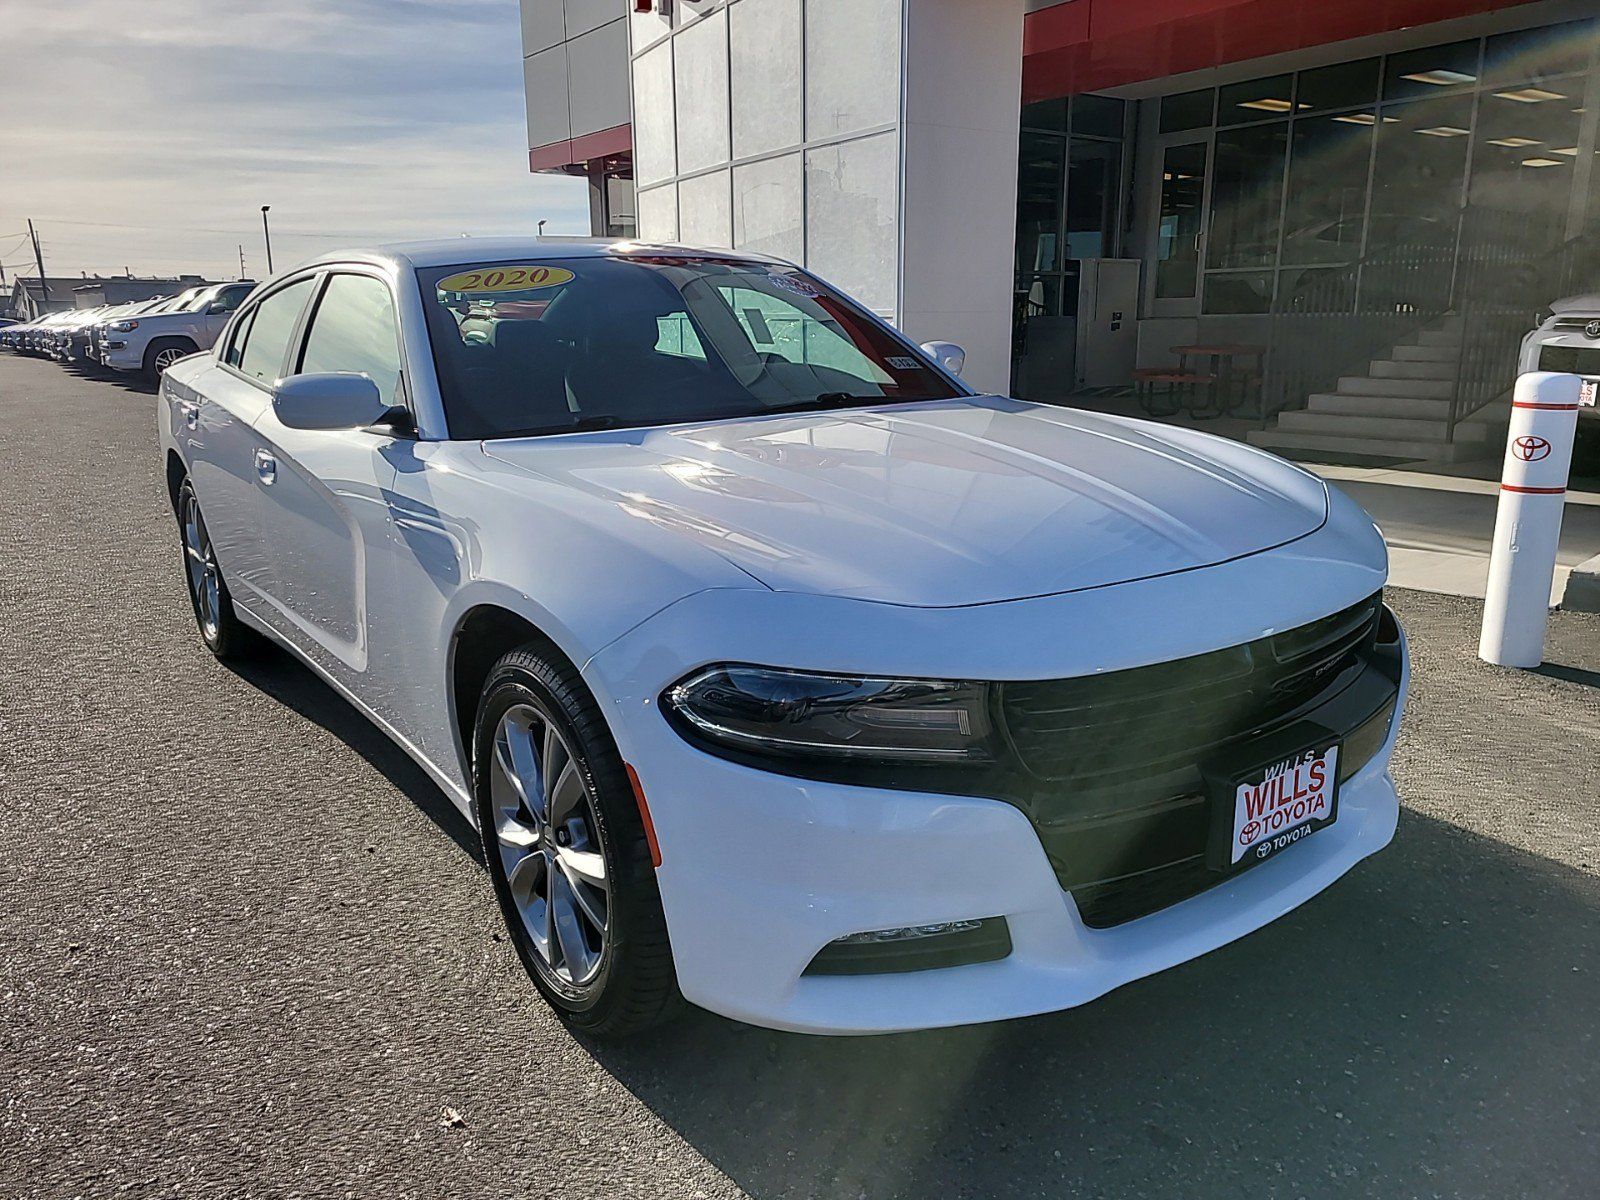 2020 - Dodge - Charger - $25,588